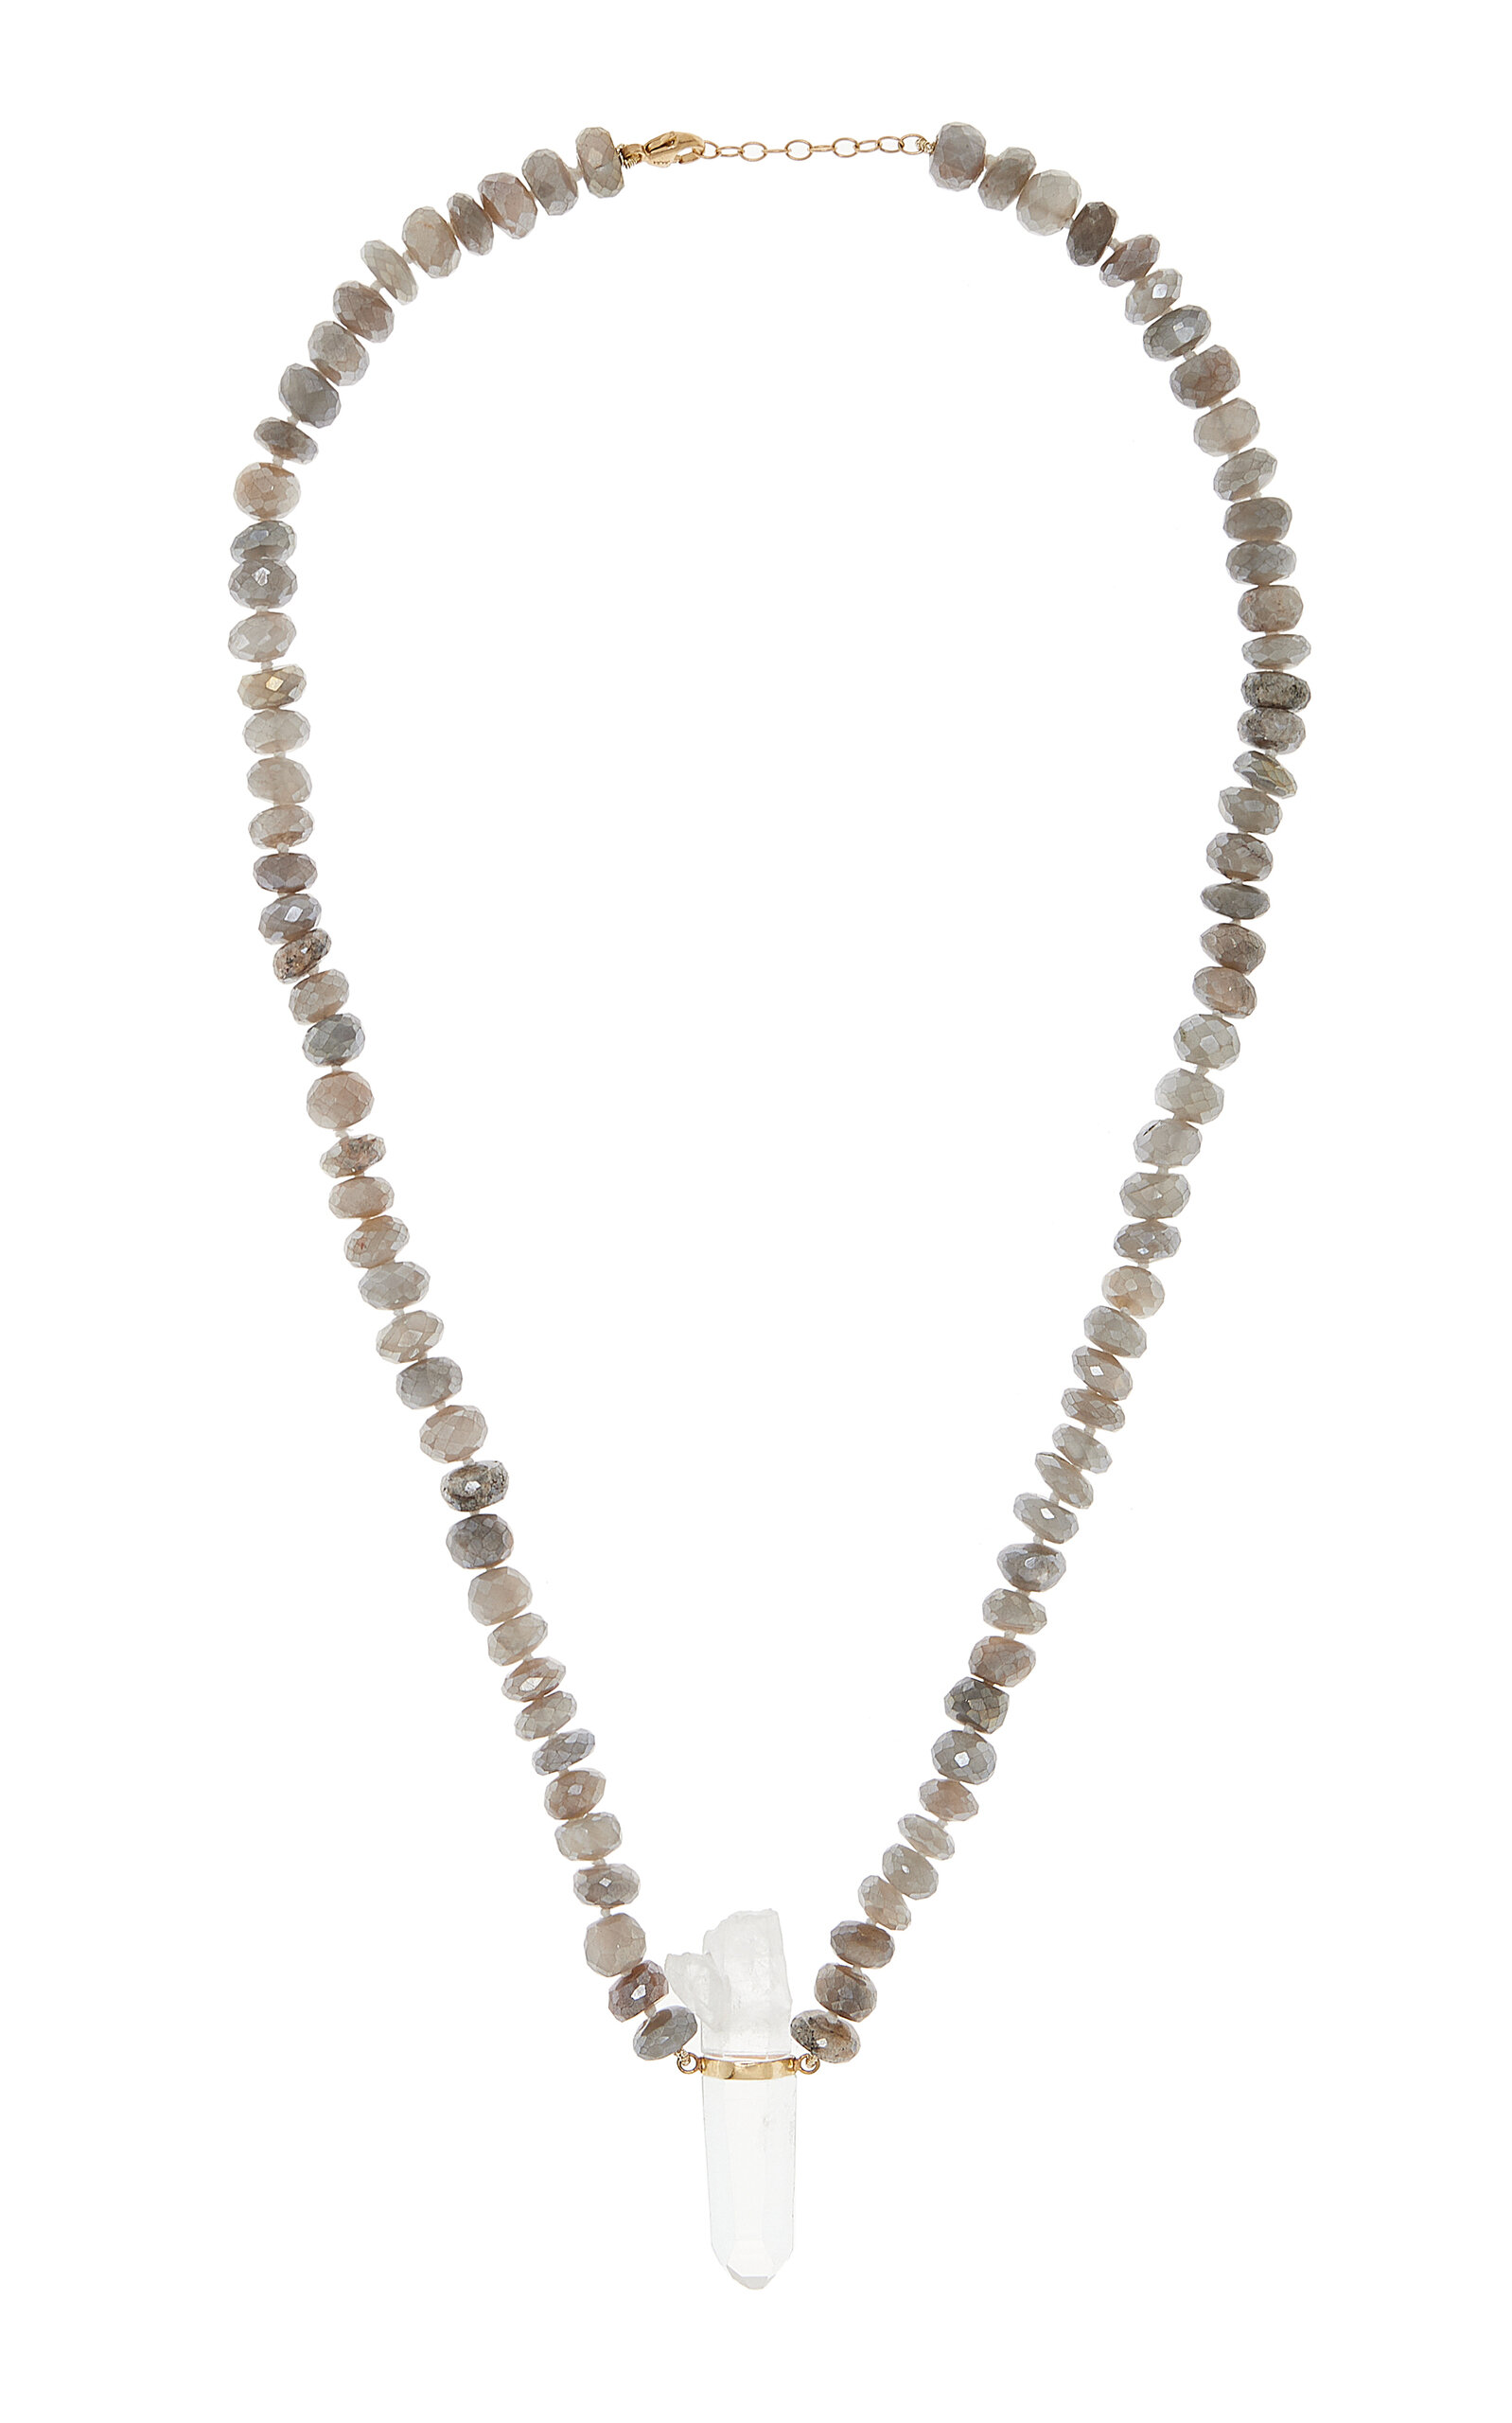 Jia Jia 14k Yellow Gold Labradorite; Crystal Necklace In Light Grey